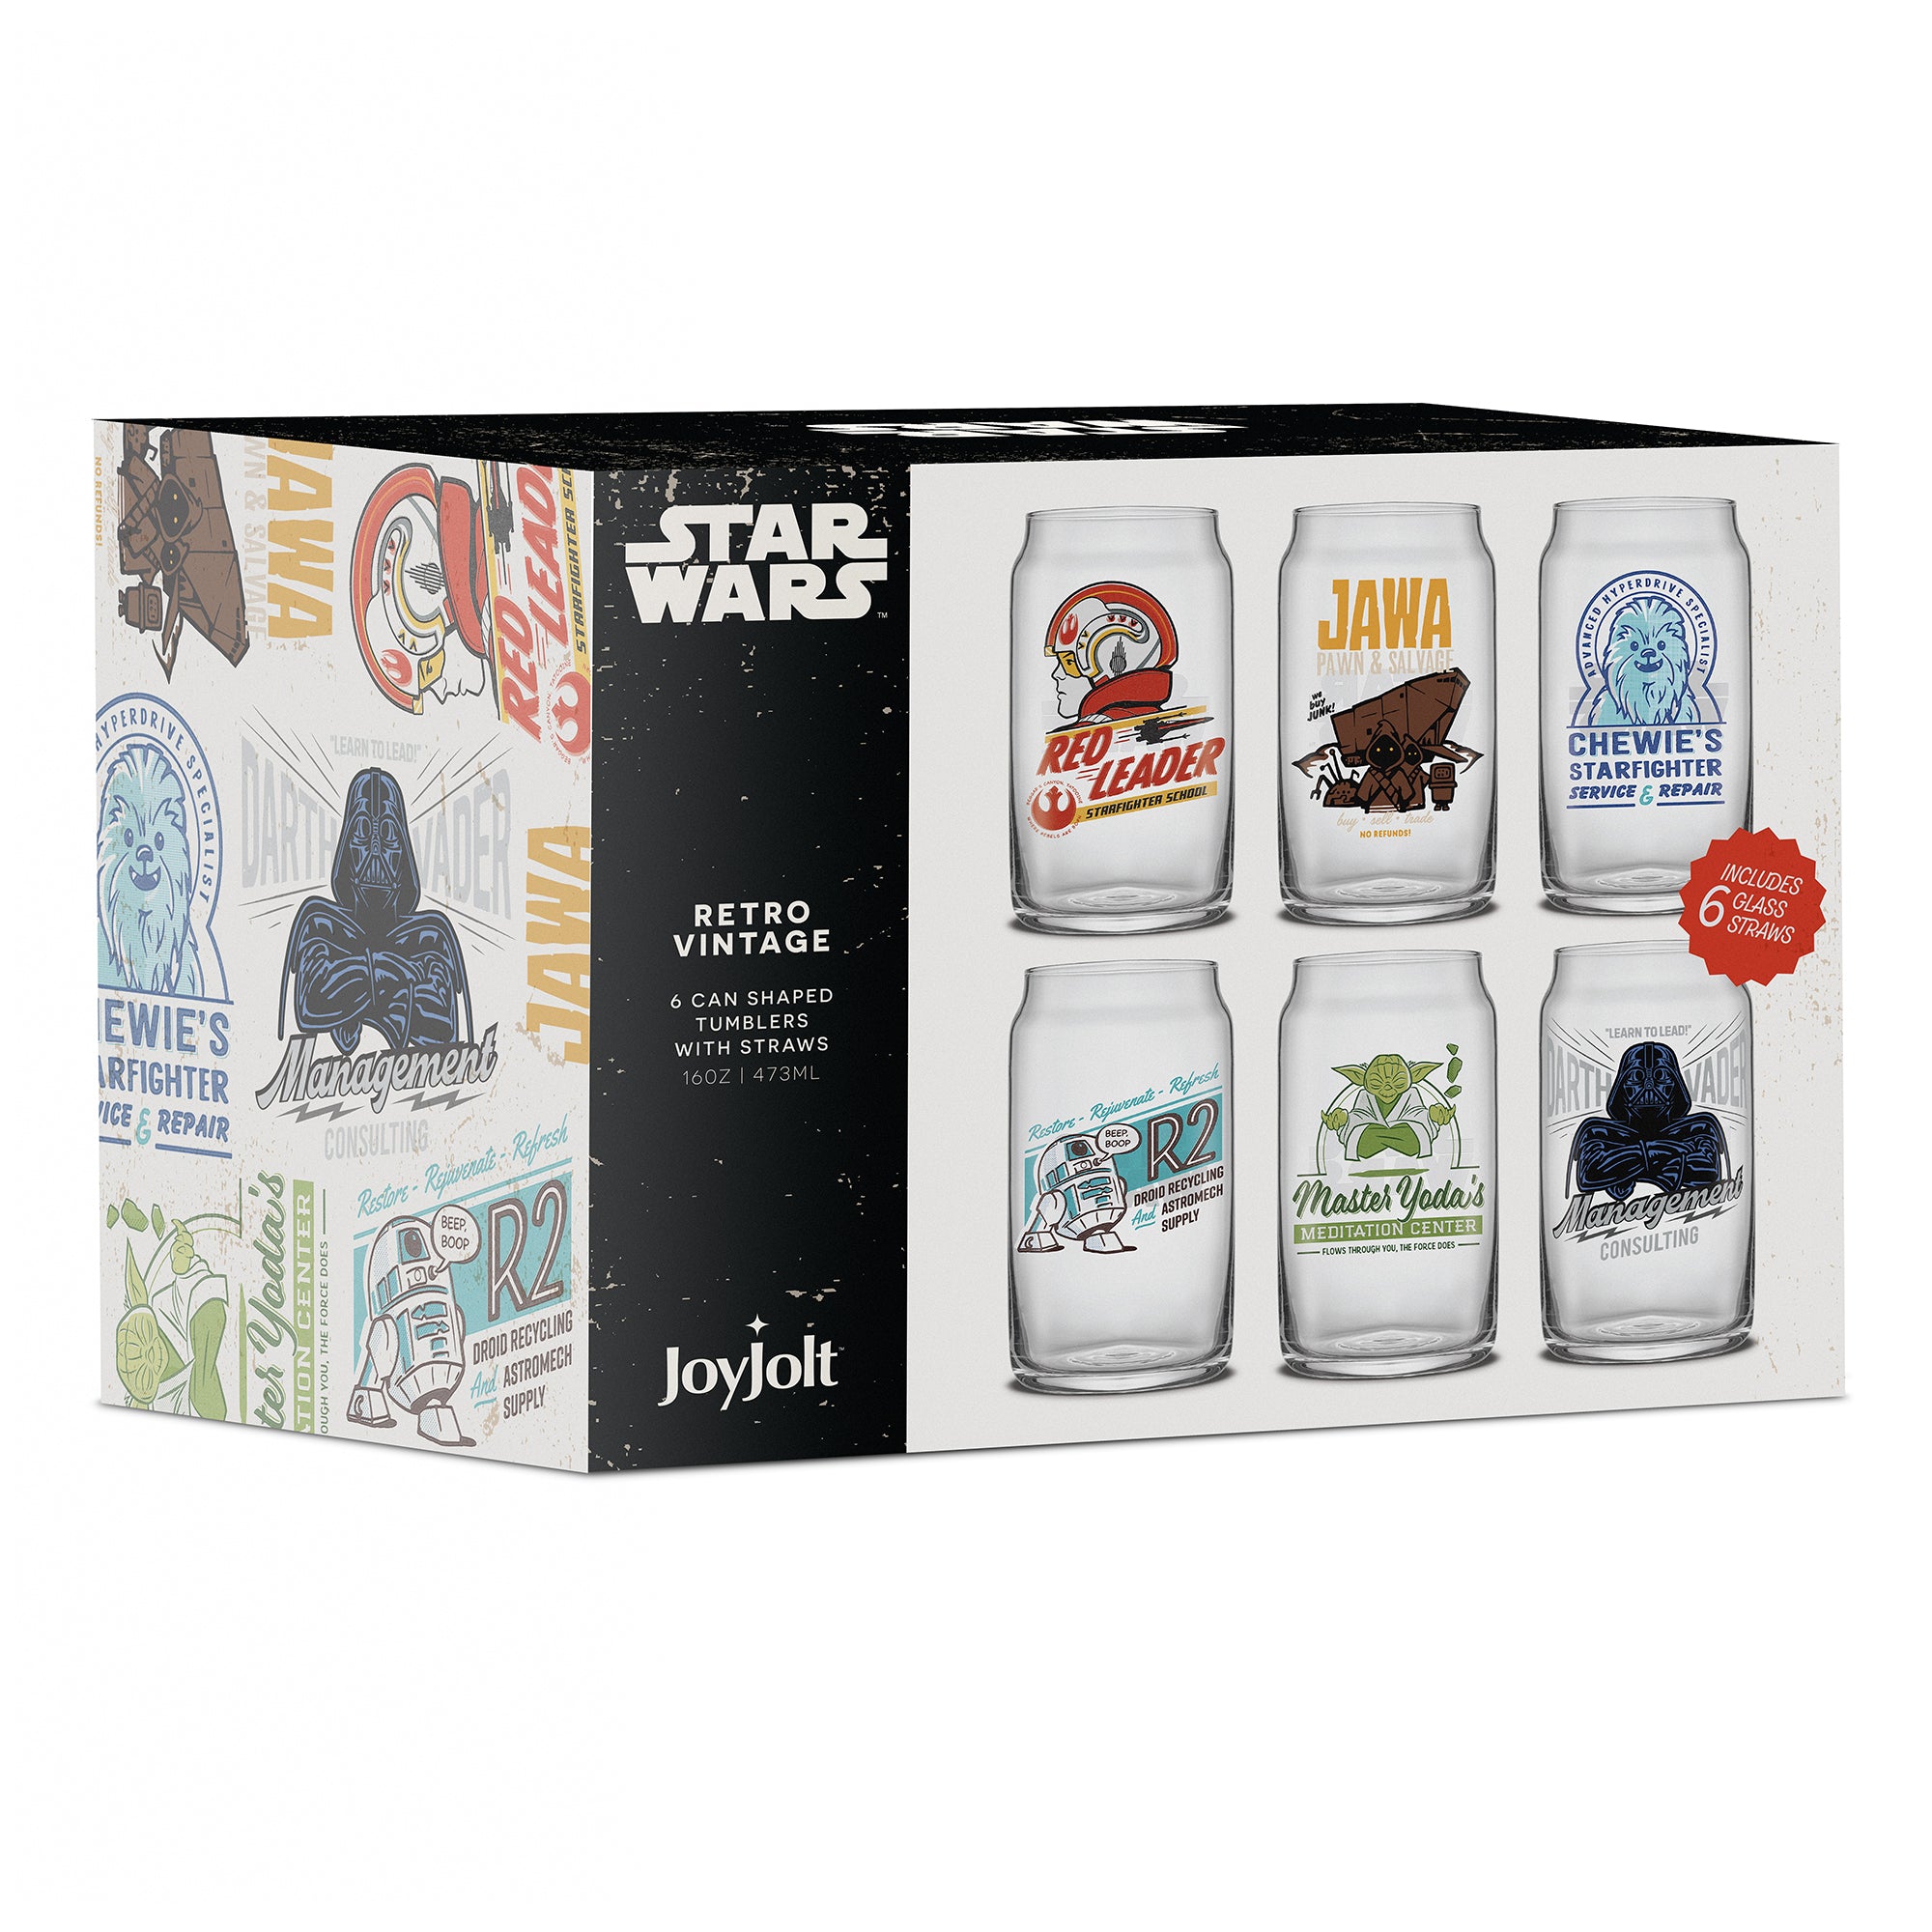 Retro-inspired Star Wars can-shaped drinking glasses collector's box featuring all of the designs.